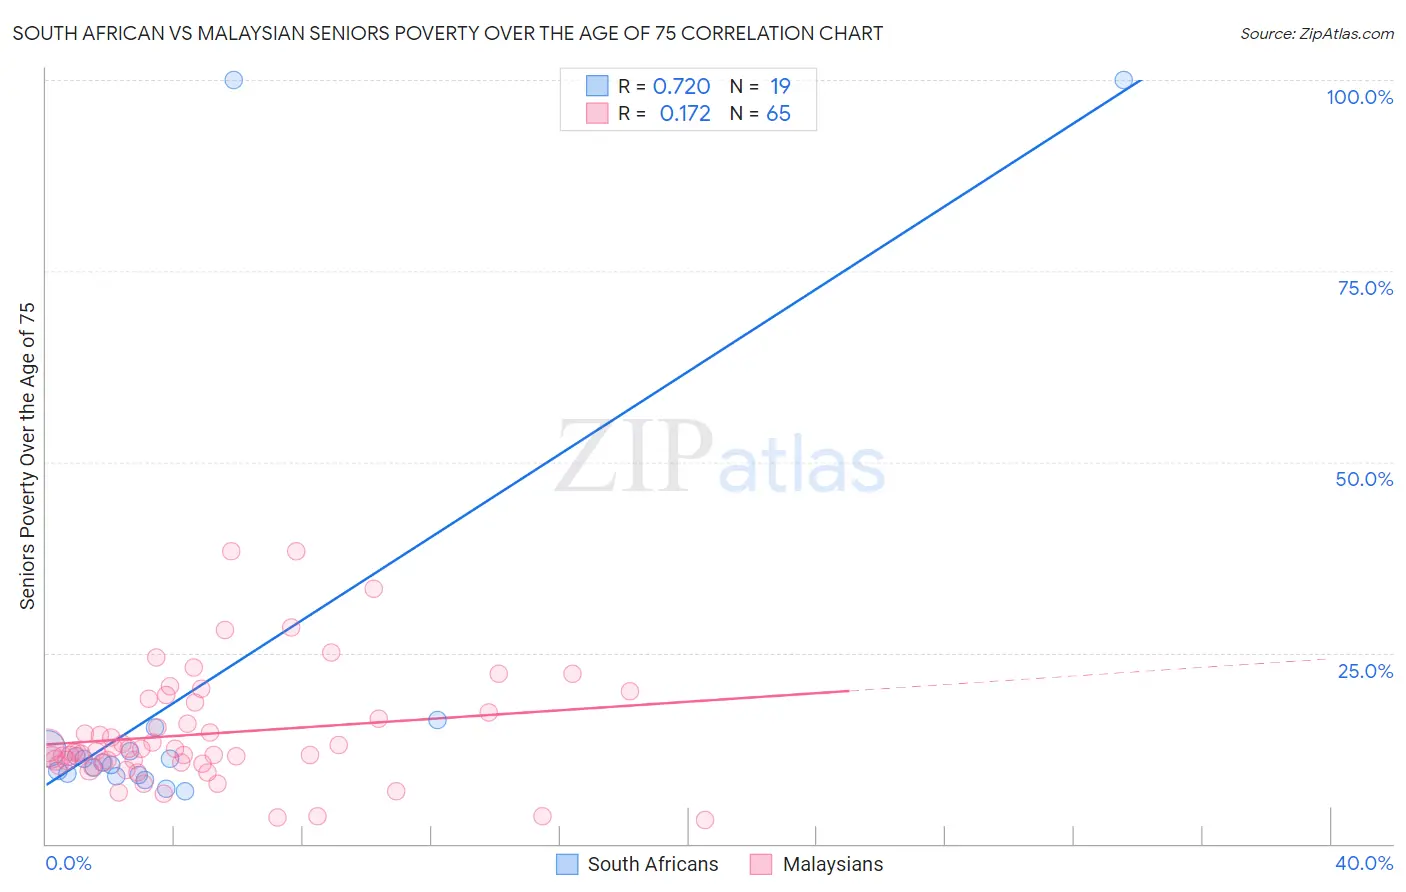 South African vs Malaysian Seniors Poverty Over the Age of 75